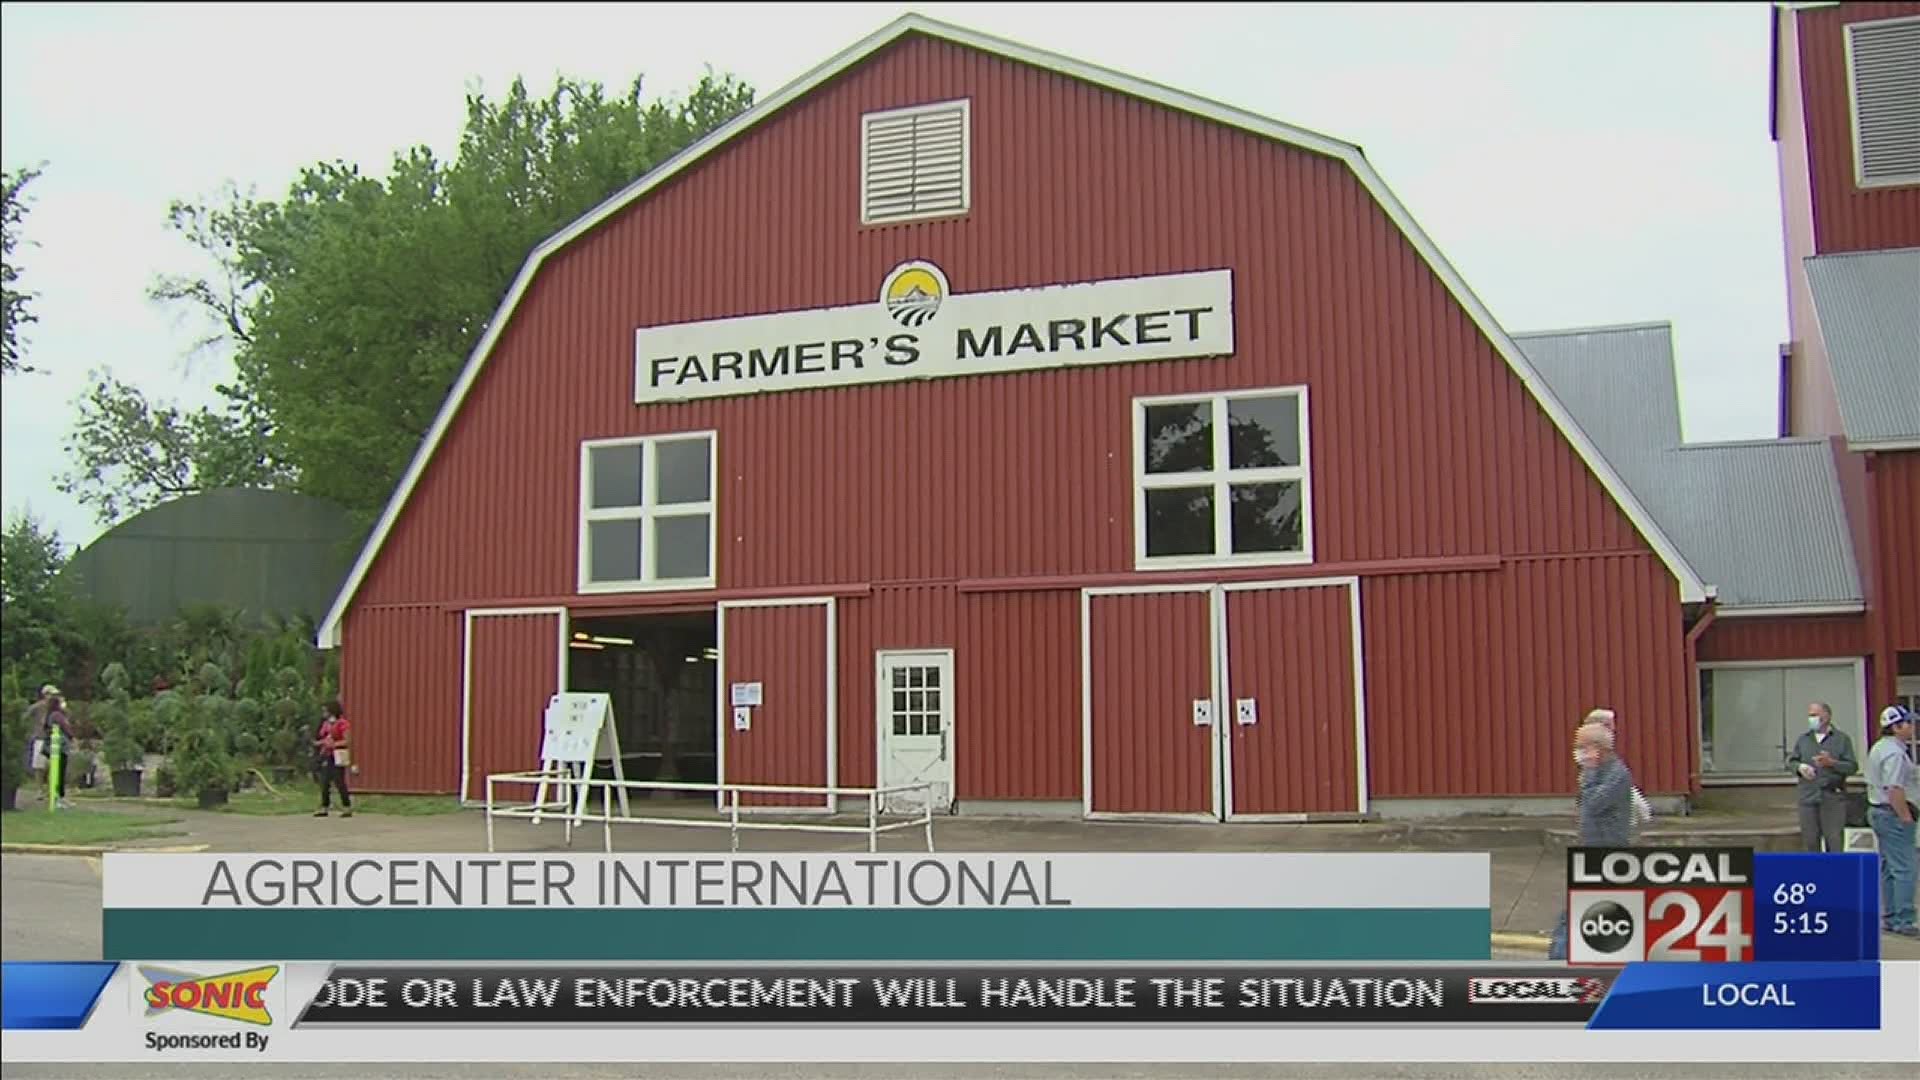 The Agricenter Farmer's Market will open for three days per week with a lower capacity and safety changes.